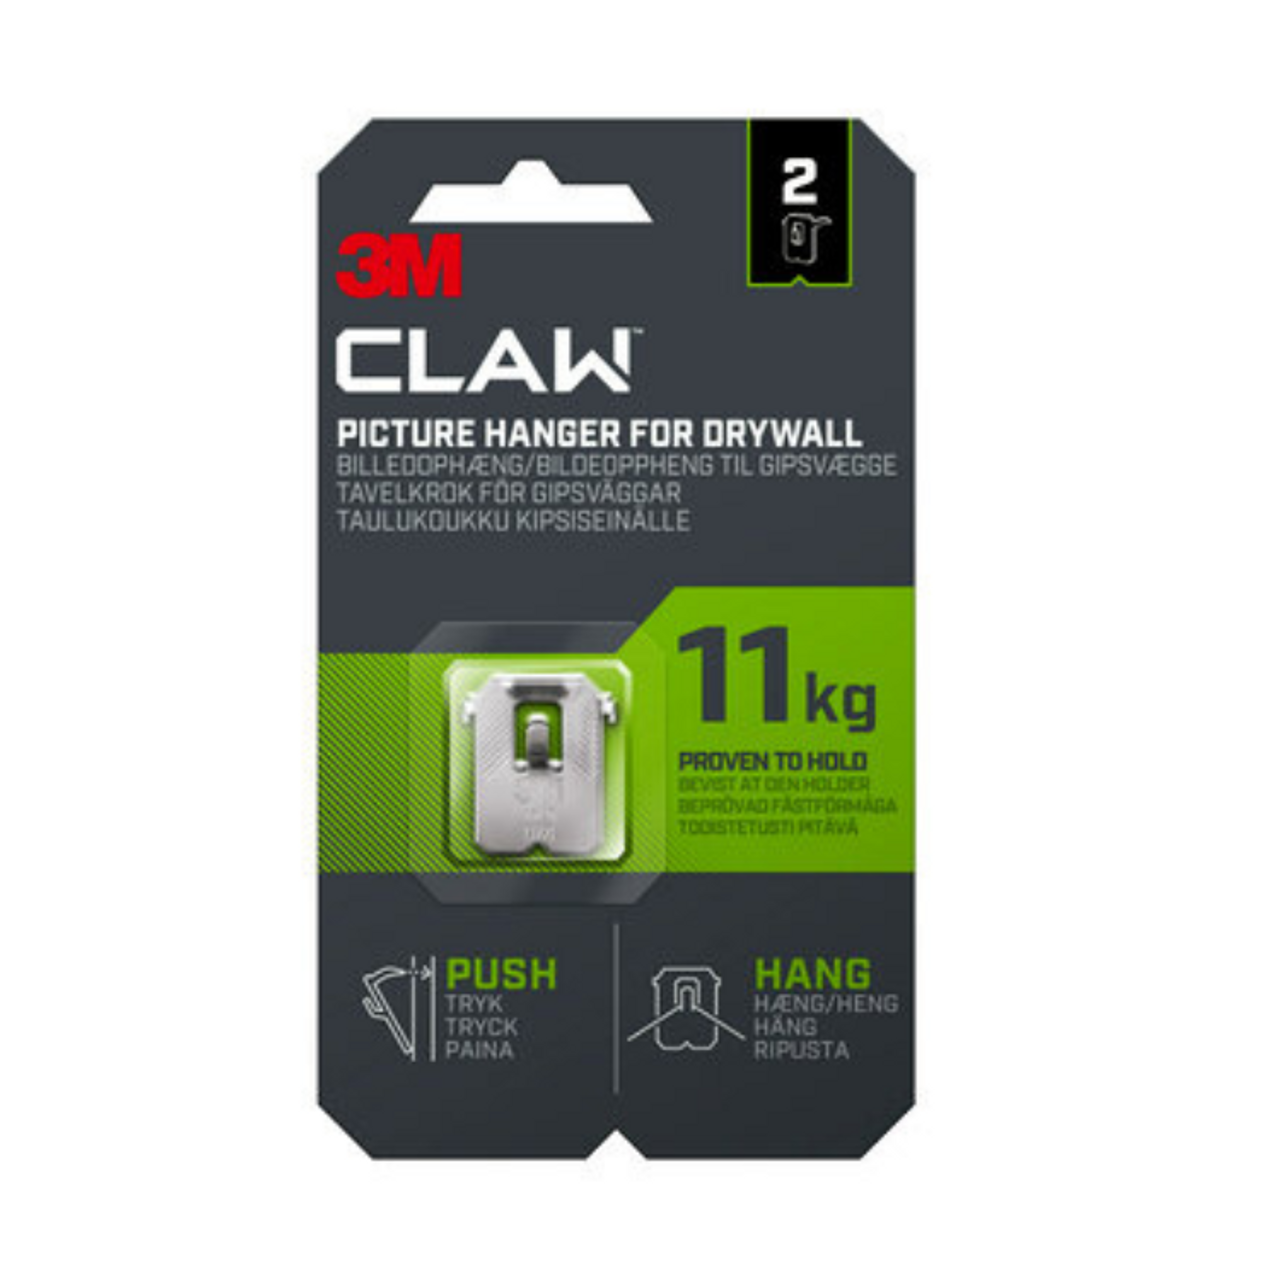 3m Claw Drywall Picture Hanger20kg 2pk